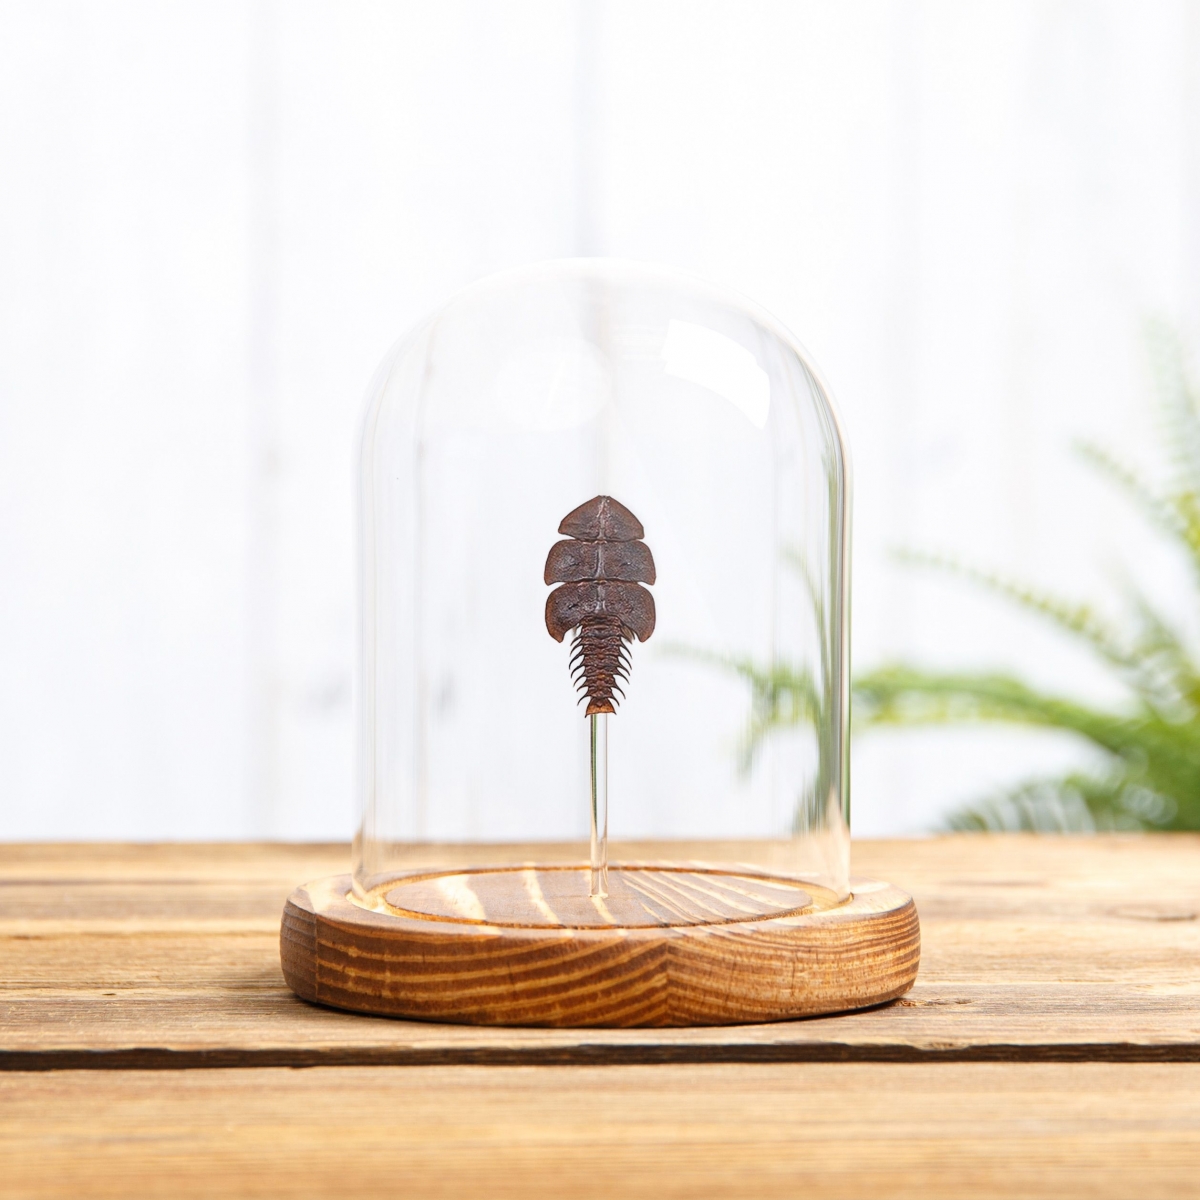 Trilobite Beetle in Glass Dome with Wooden Base (Duliticola hoiseni)